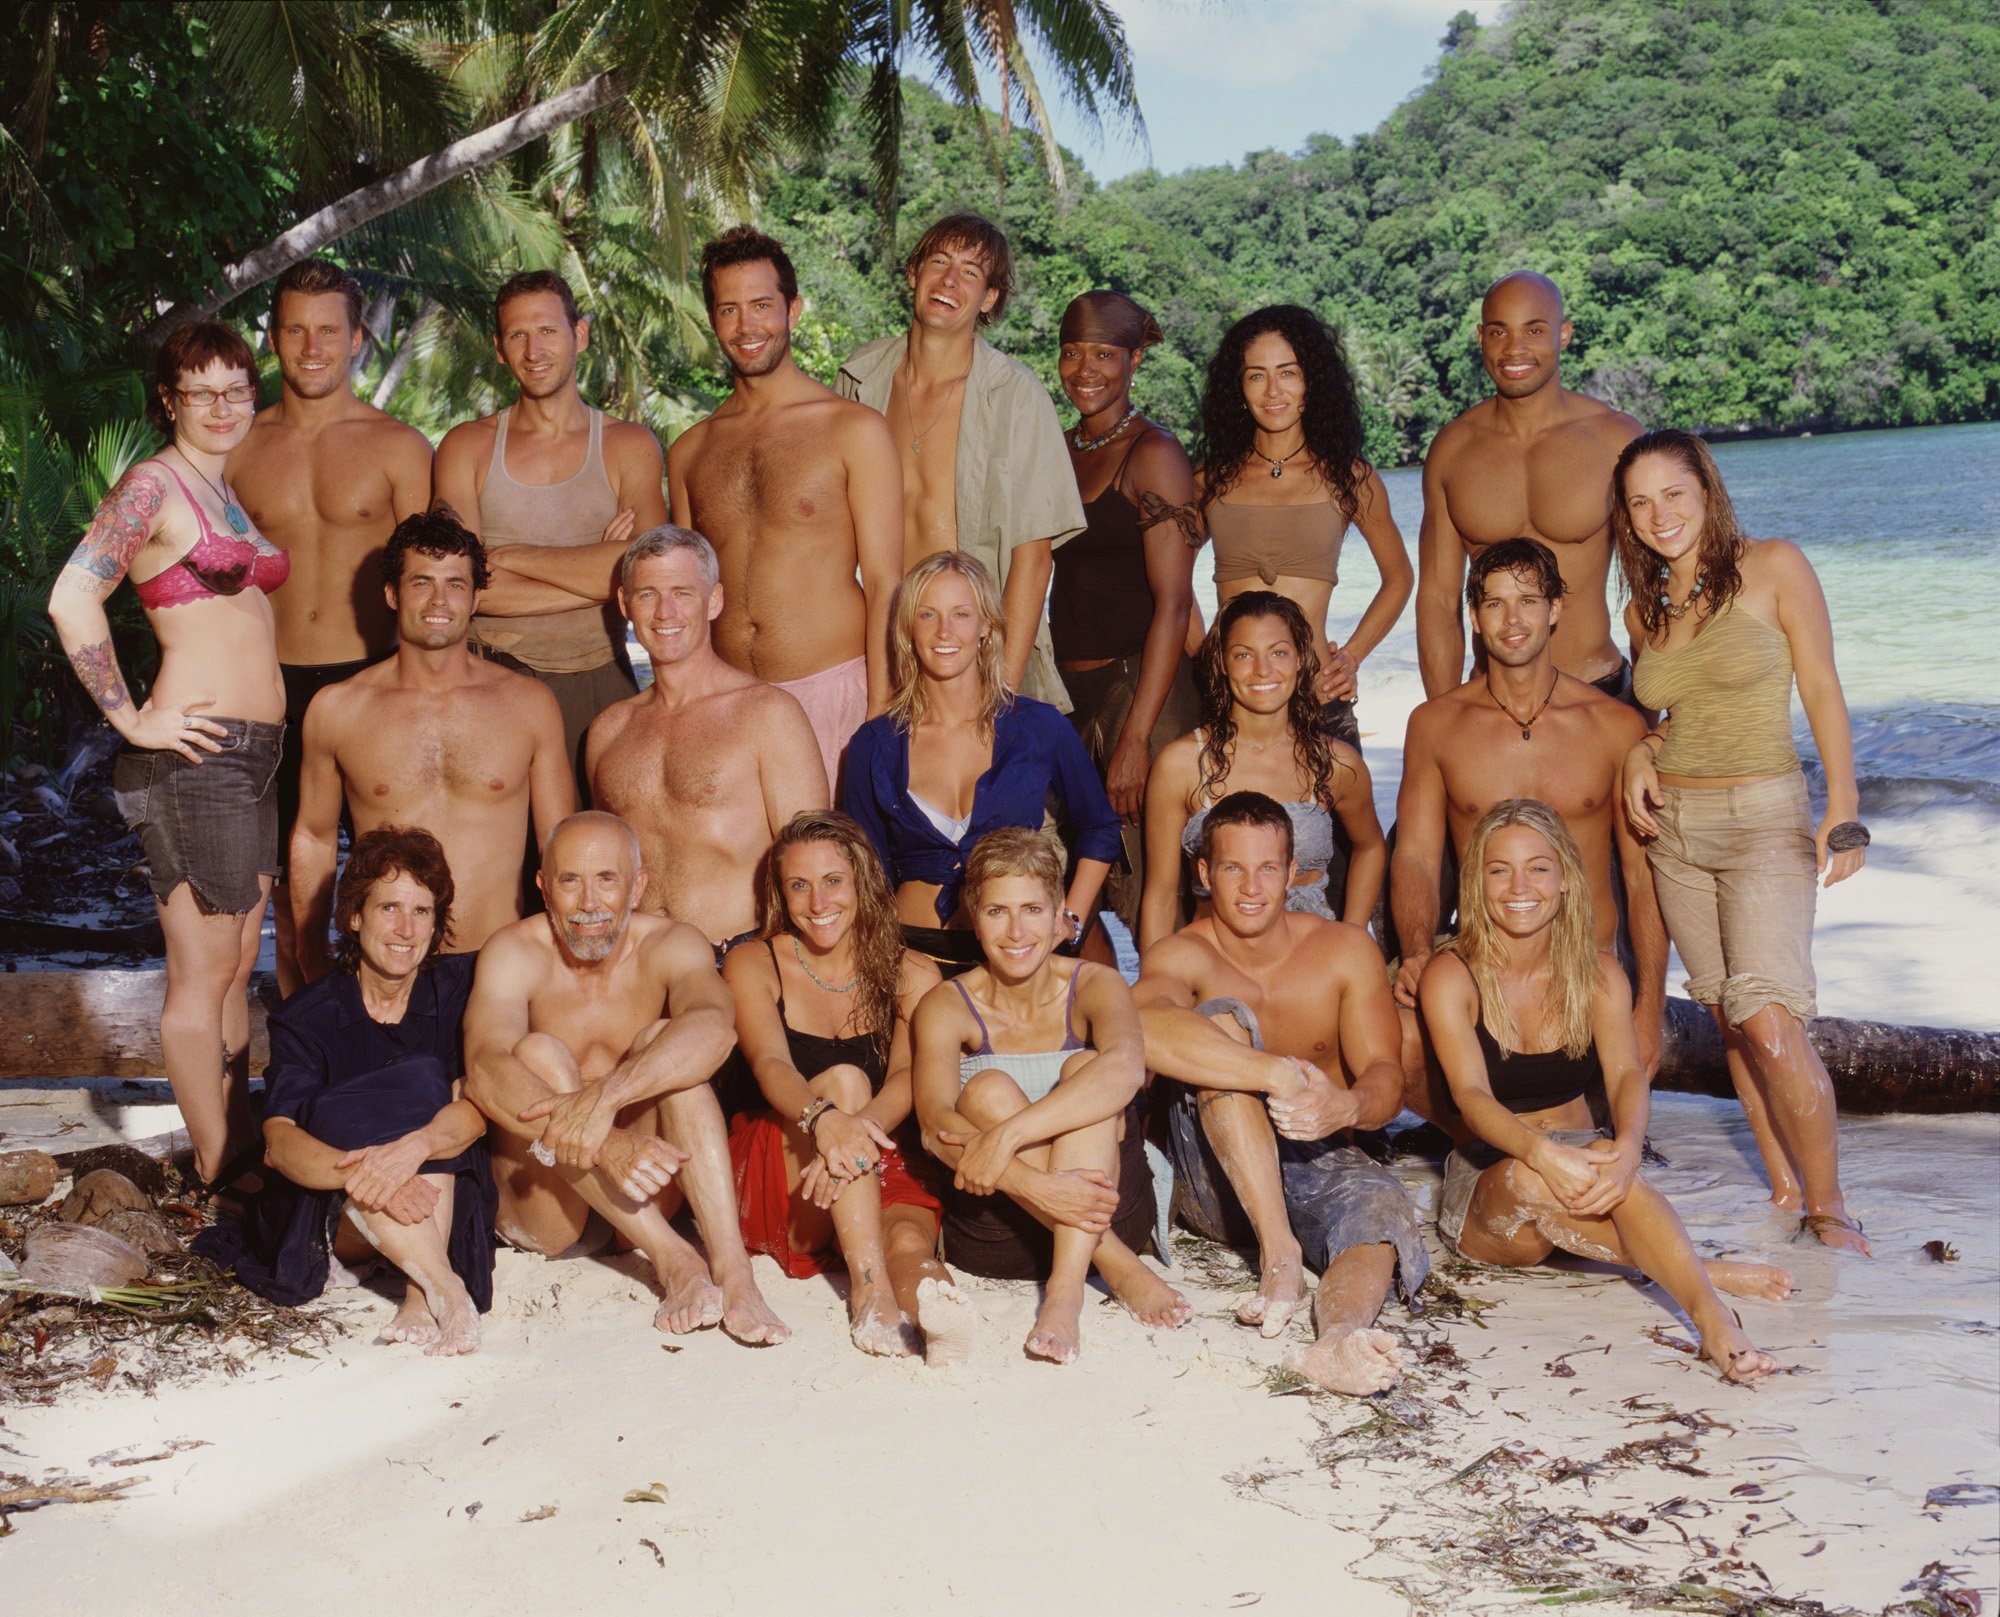 Angie Jakusz on the back row with fellow castaways who participated in "Survivor: Palau," photo taken on October 30, 2004, at Kokor, Palau | Photo: Monty Brinton/CBS Photo Archive/Getty Images